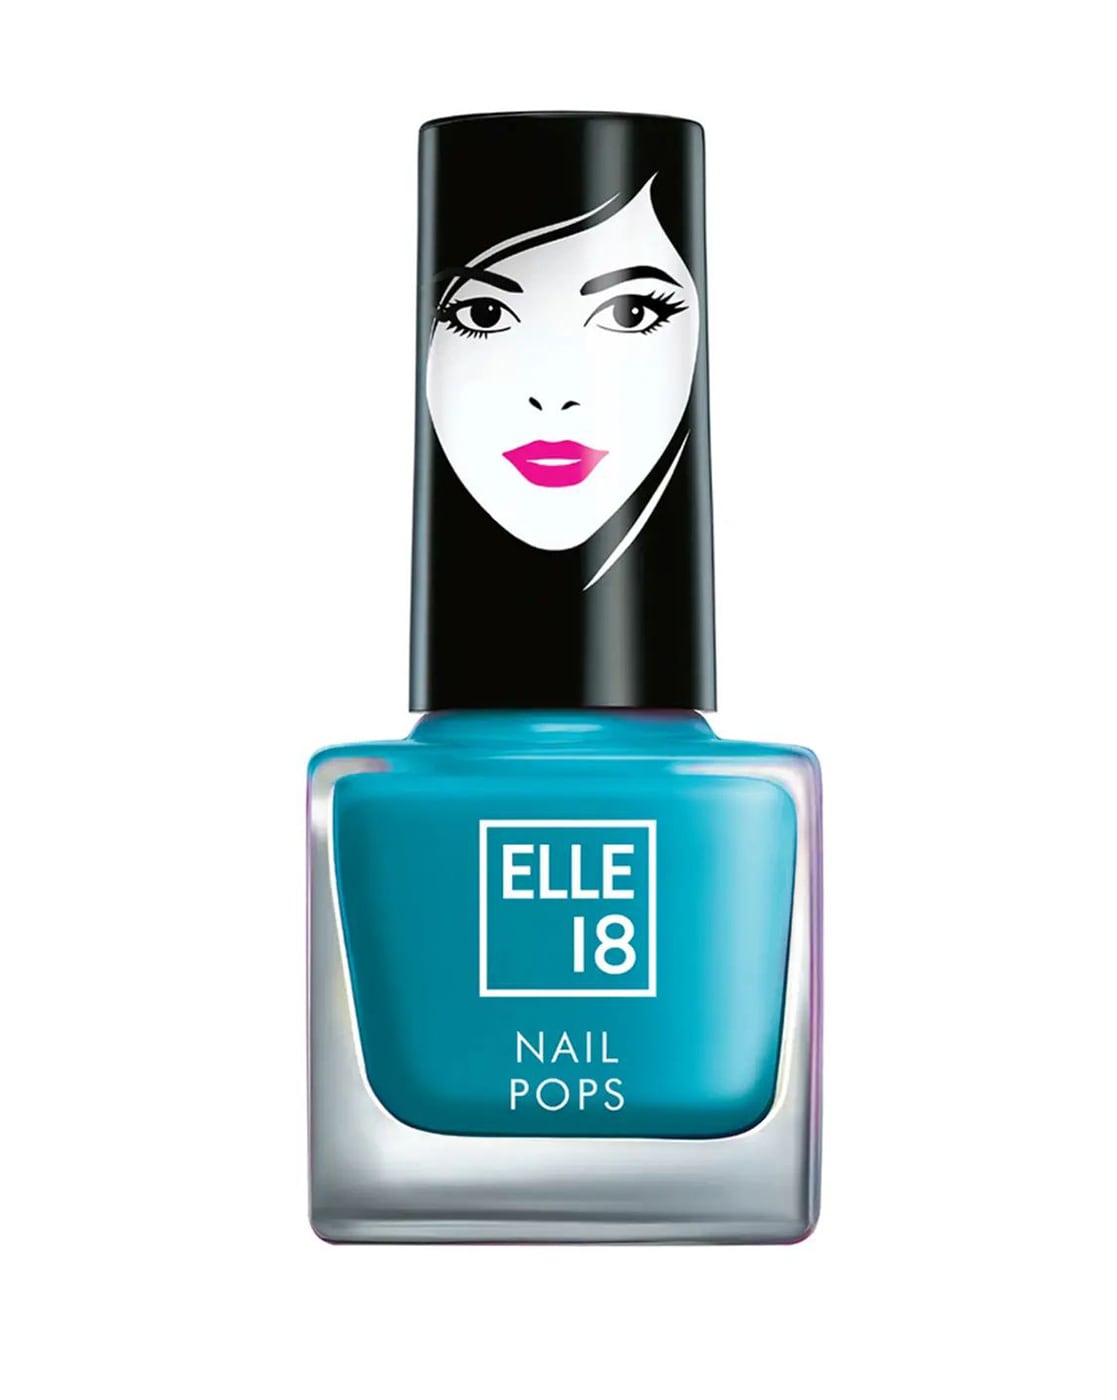 Buy Elle 18 Nail Pops Nail Colour Online at Best Price of Rs 49.5 -  bigbasket